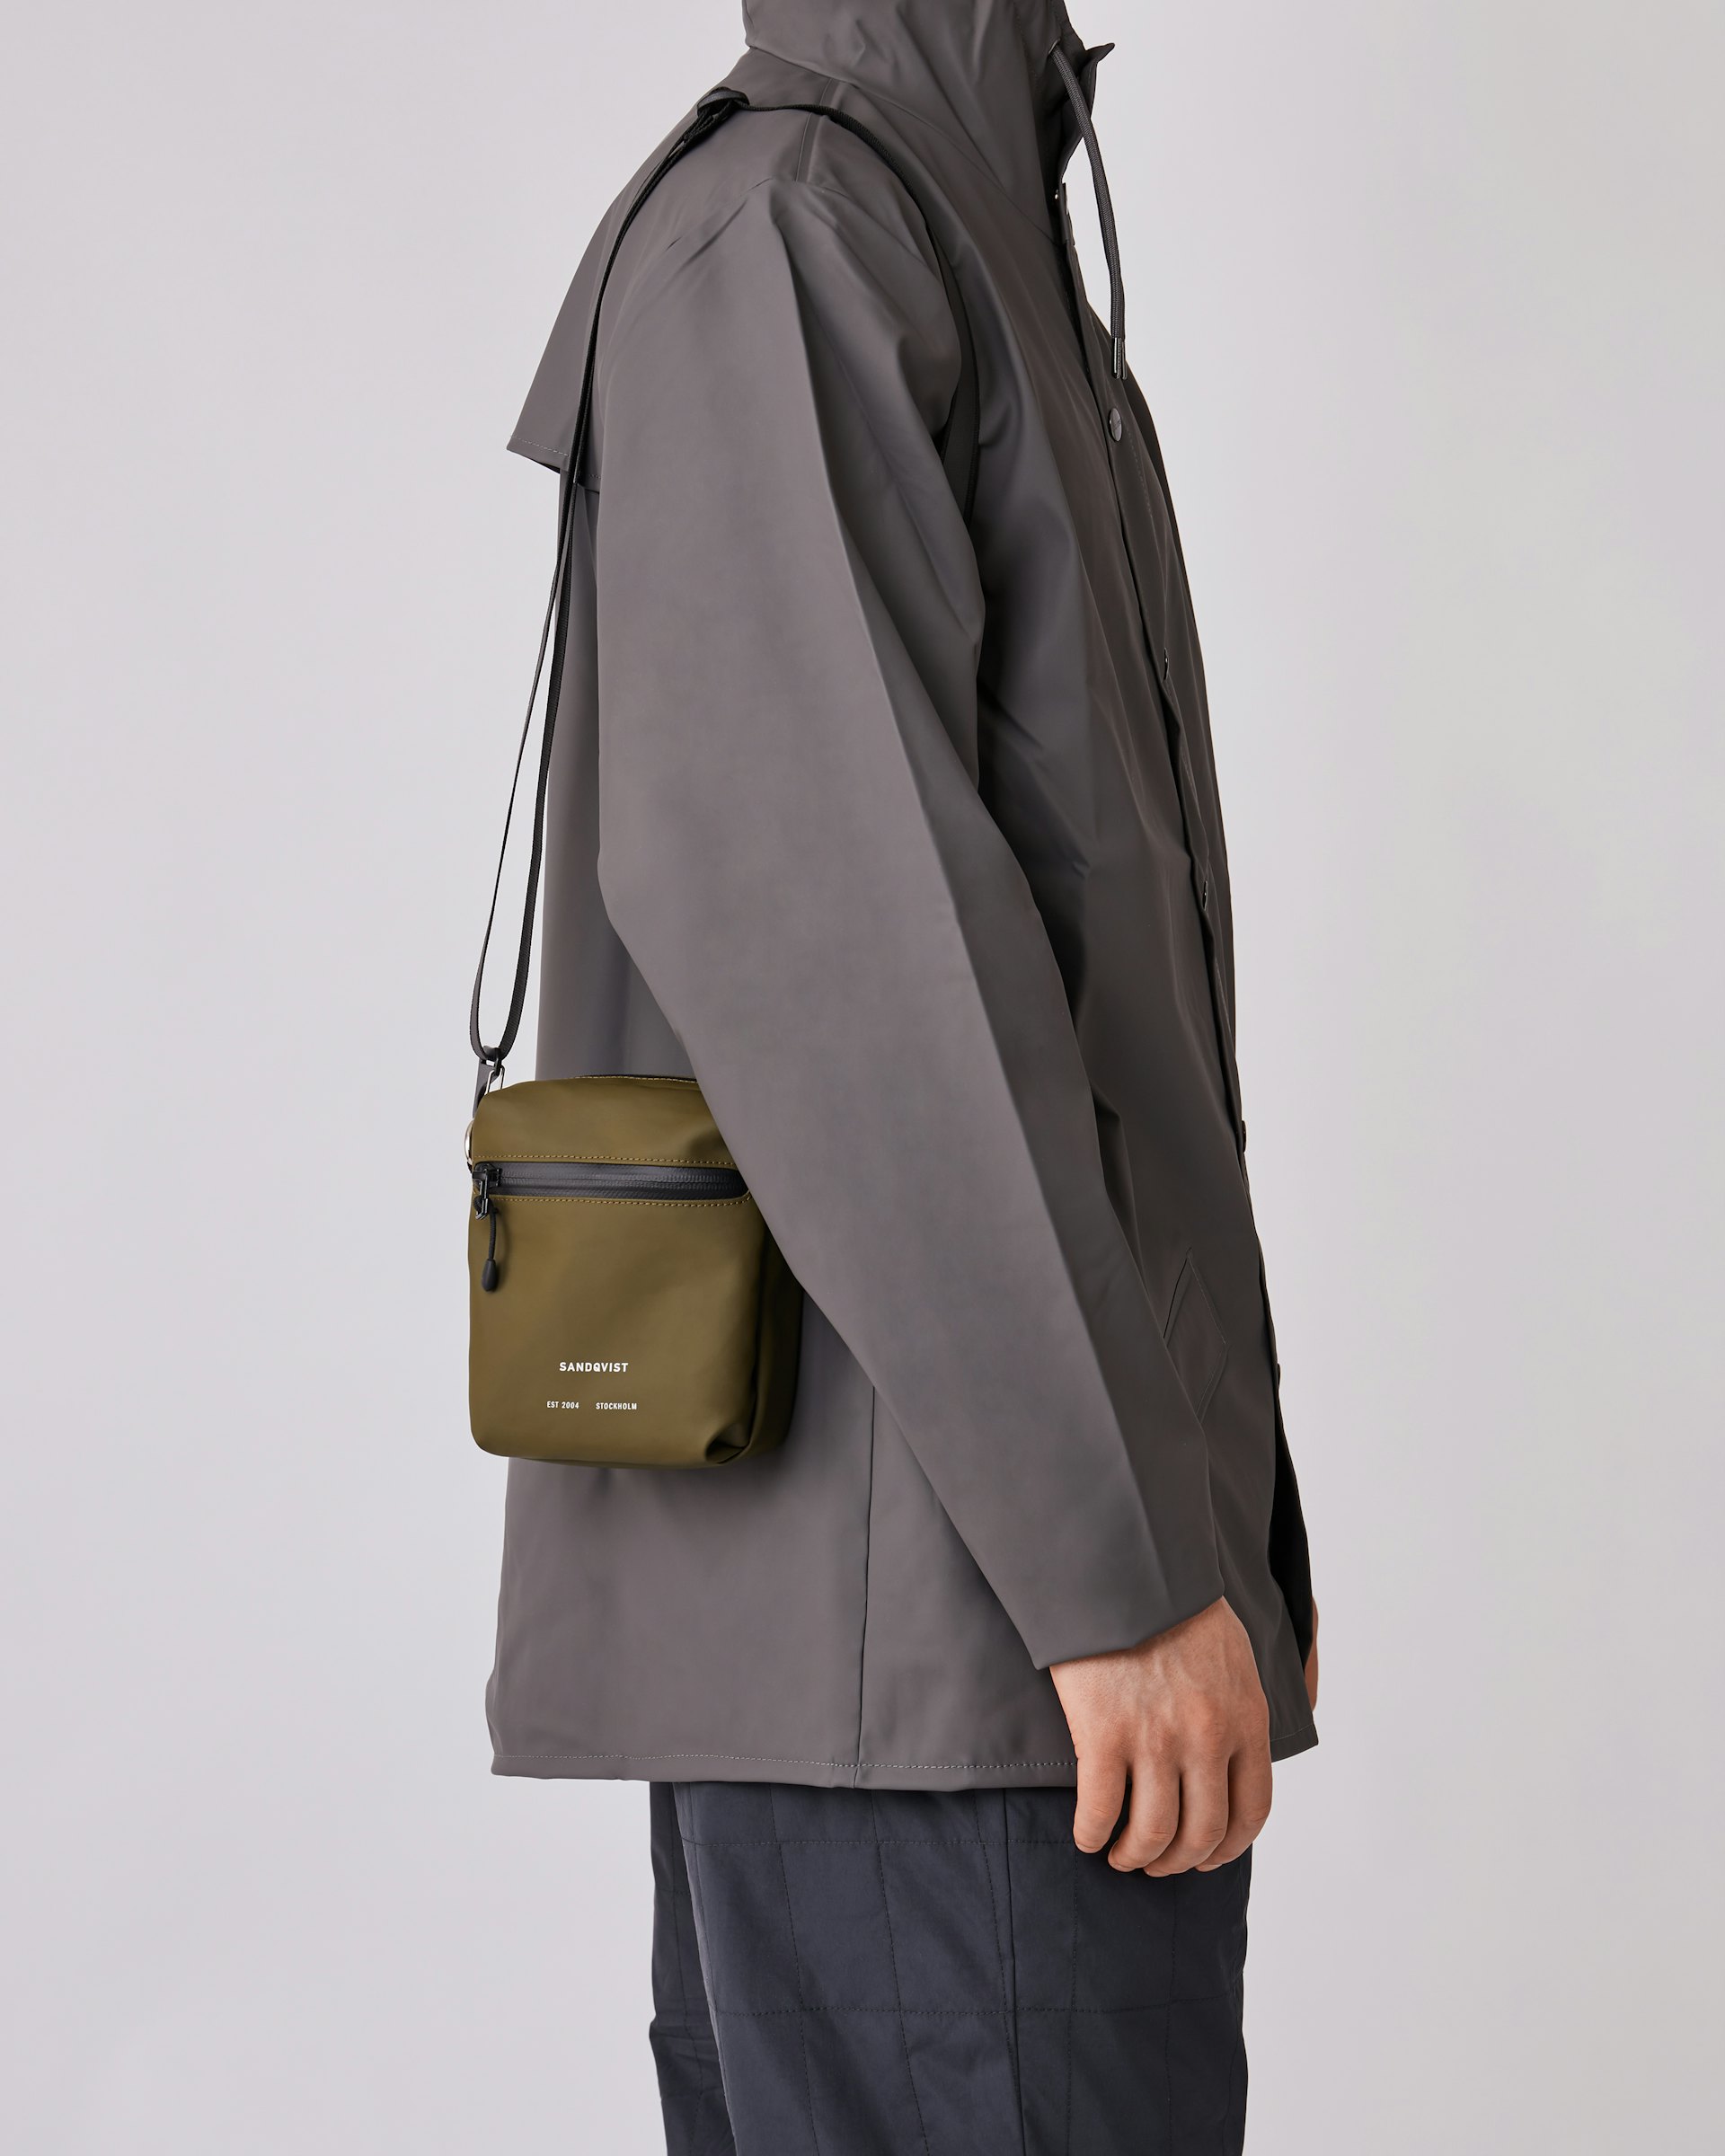 Poe belongs to the category Shoulder bags and is in color olive (5 of 5)